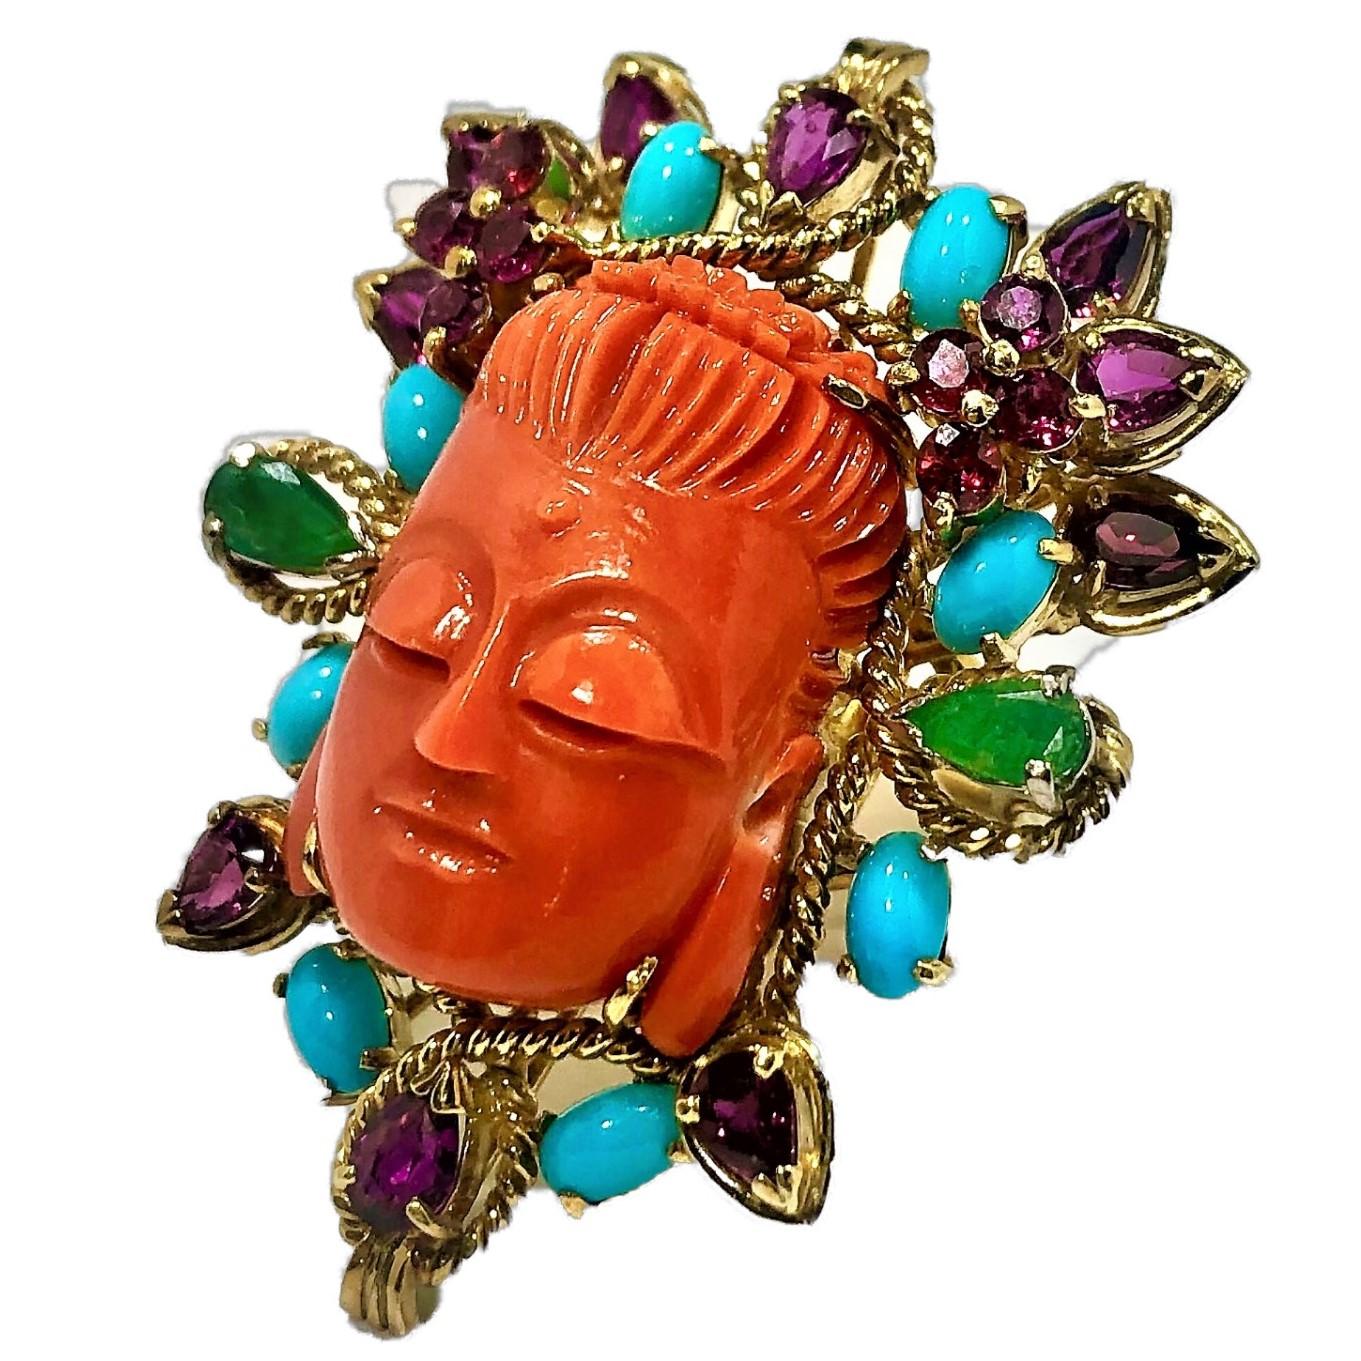 An exotic 14K yellow gold ring, featuring a finely carved coral Buddha's head measuring approximately 24mm X 16mm. The face is surrounded by oval cabochon cut turquoise, pear shaped emeralds, along with pear shaped and round cut purple/pink